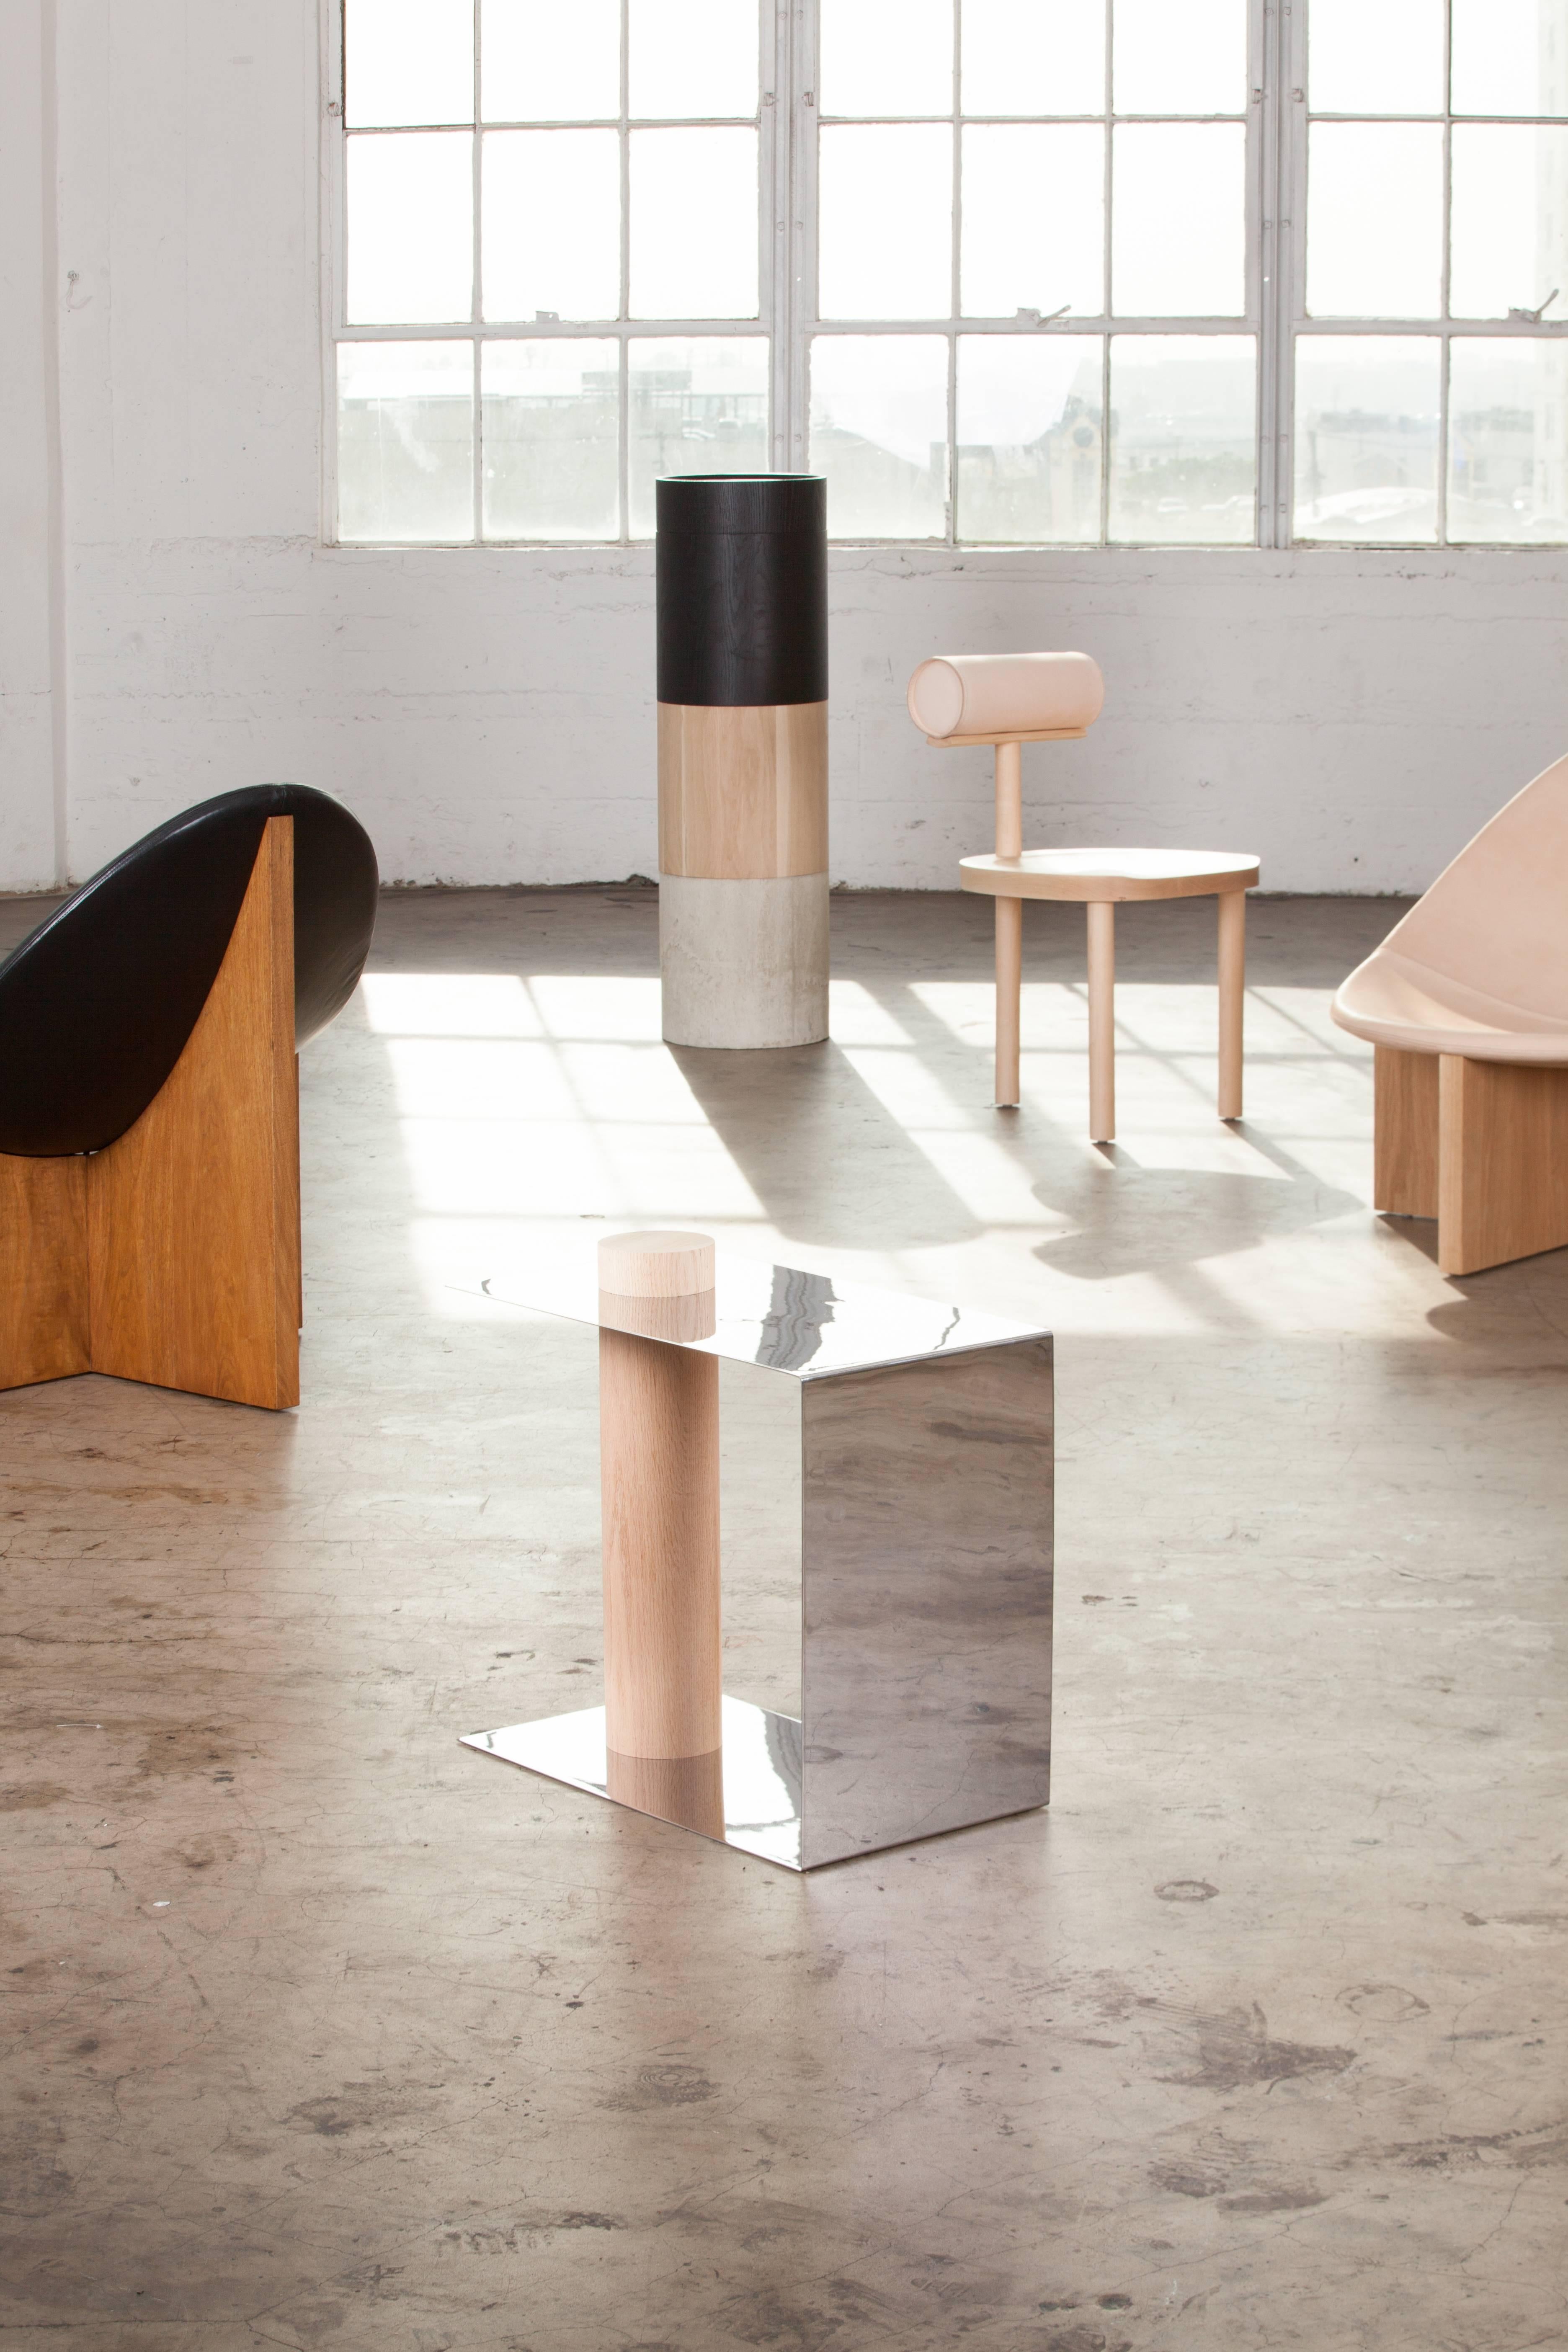 Contemporary In Stock, Puru Side Table in Stainless Steel & White Oak by Estudio Persona